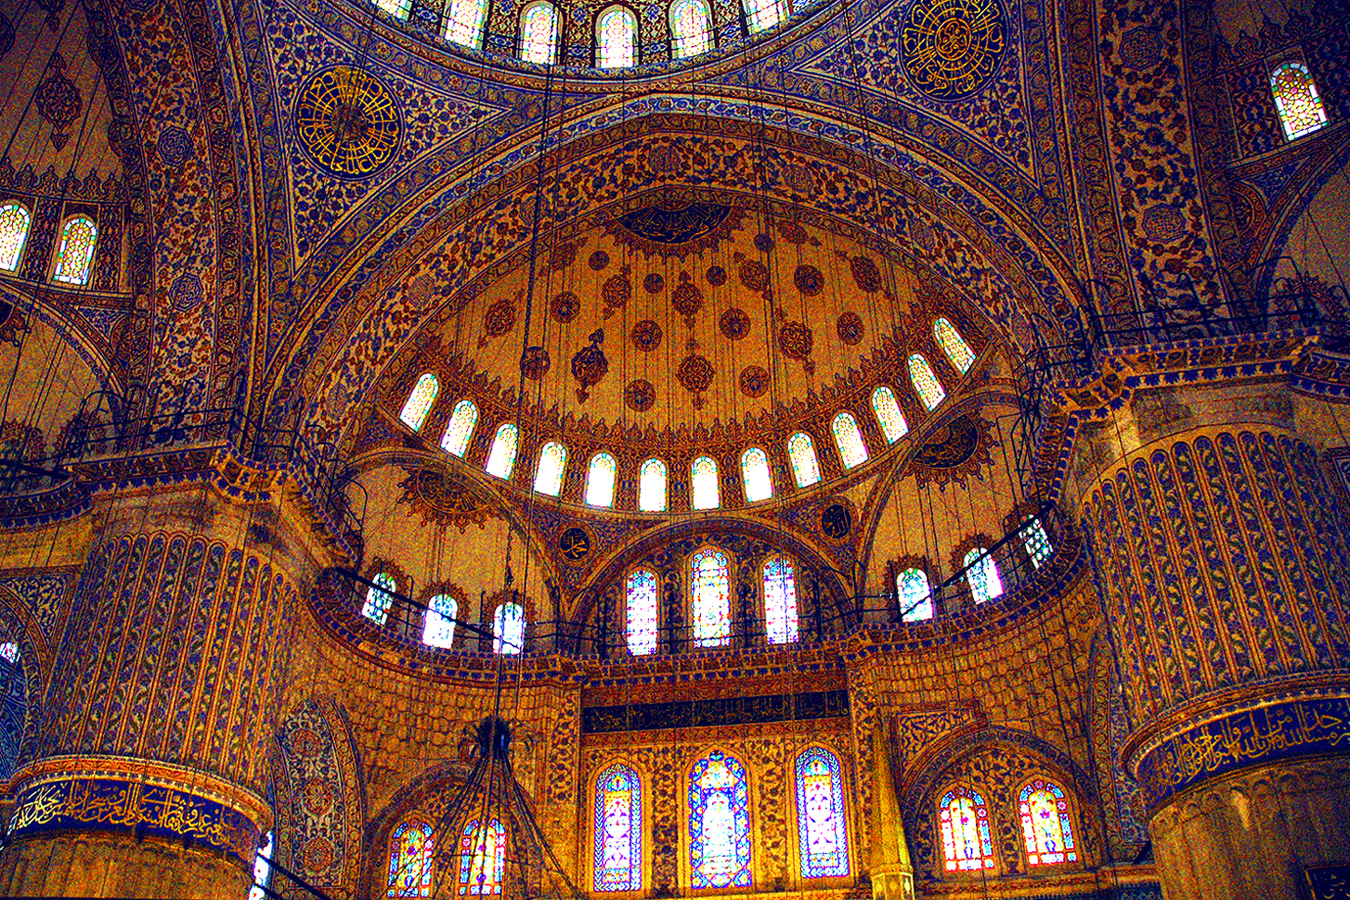 Eclipse 1999 - A17 - Dome of Blue Mosque